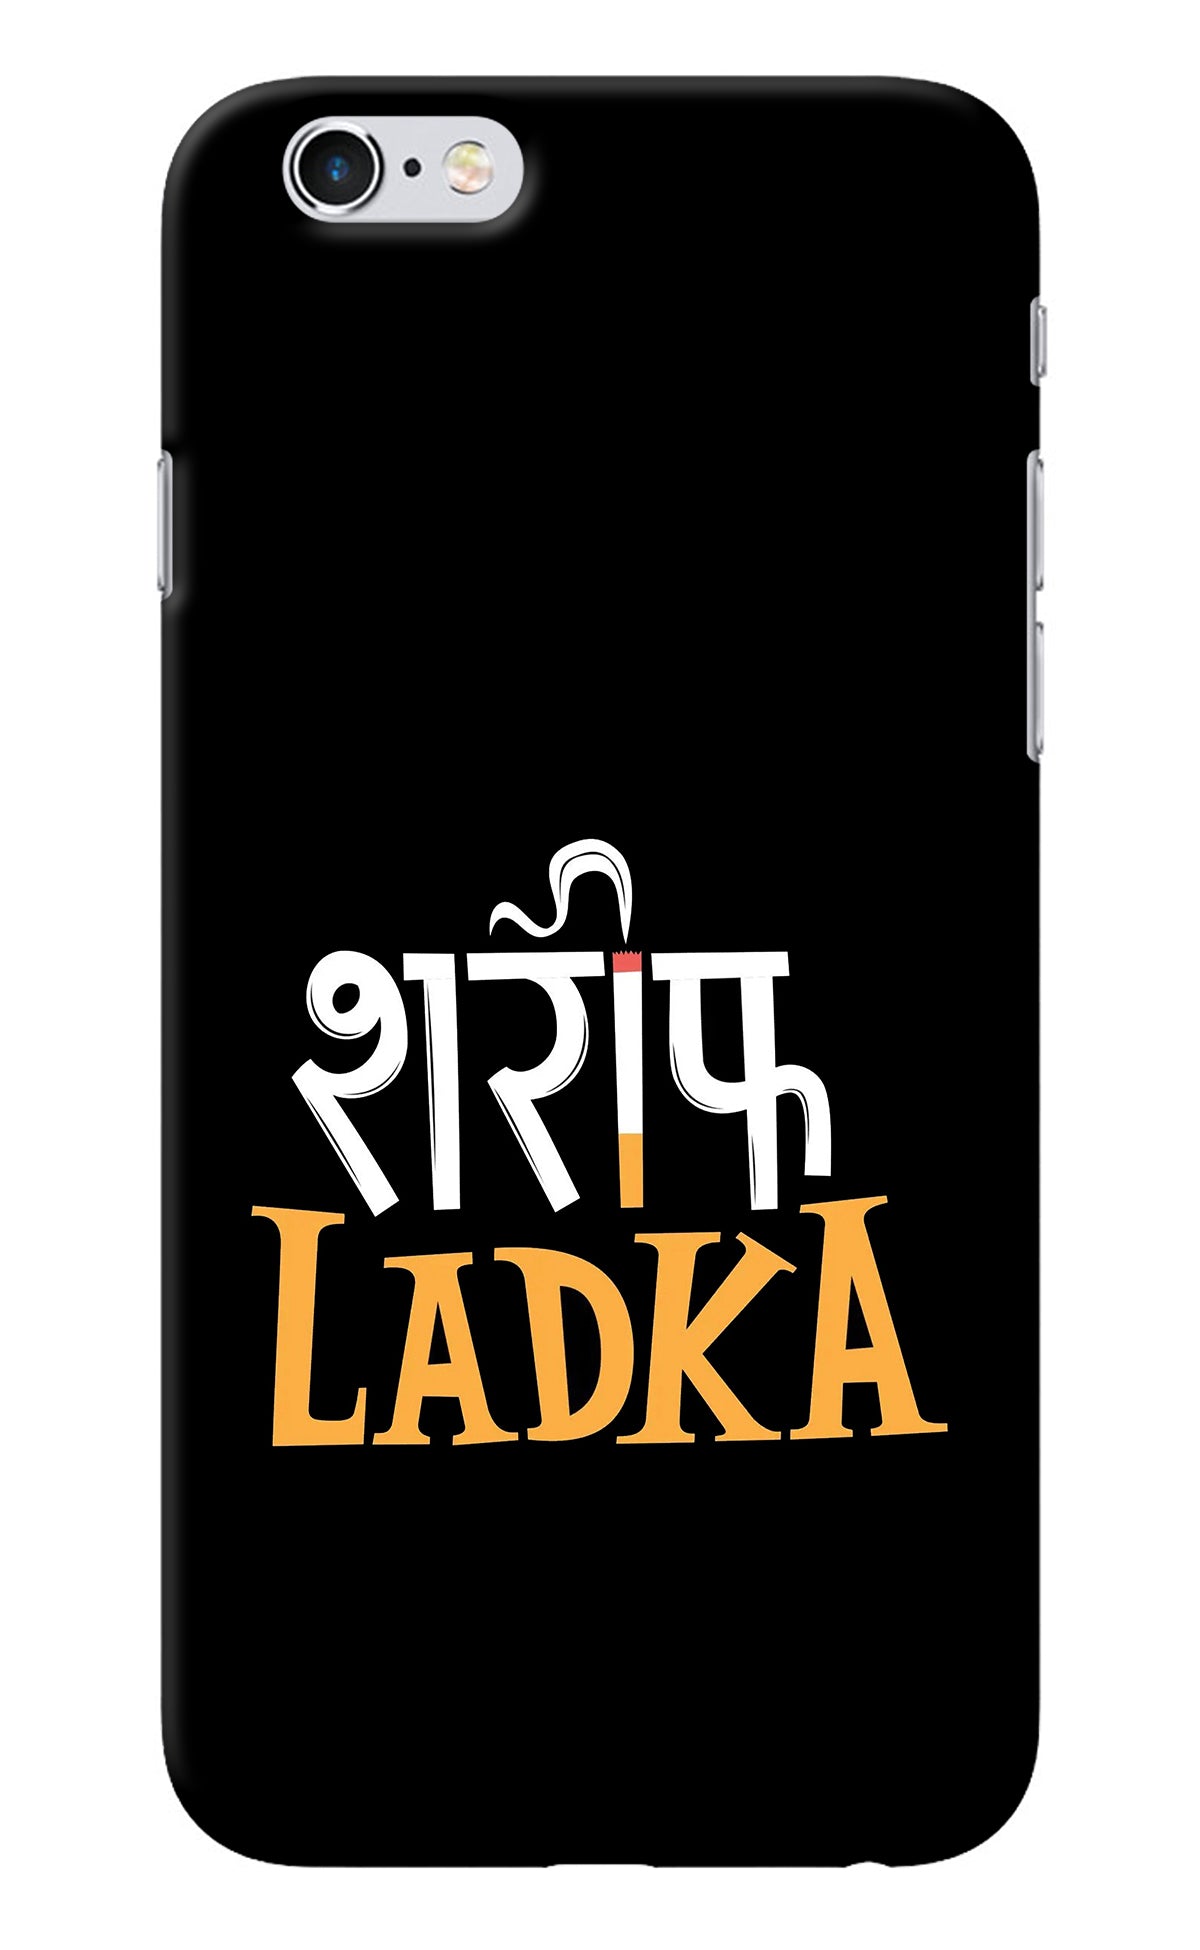 Shareef Ladka iPhone 6/6s Back Cover